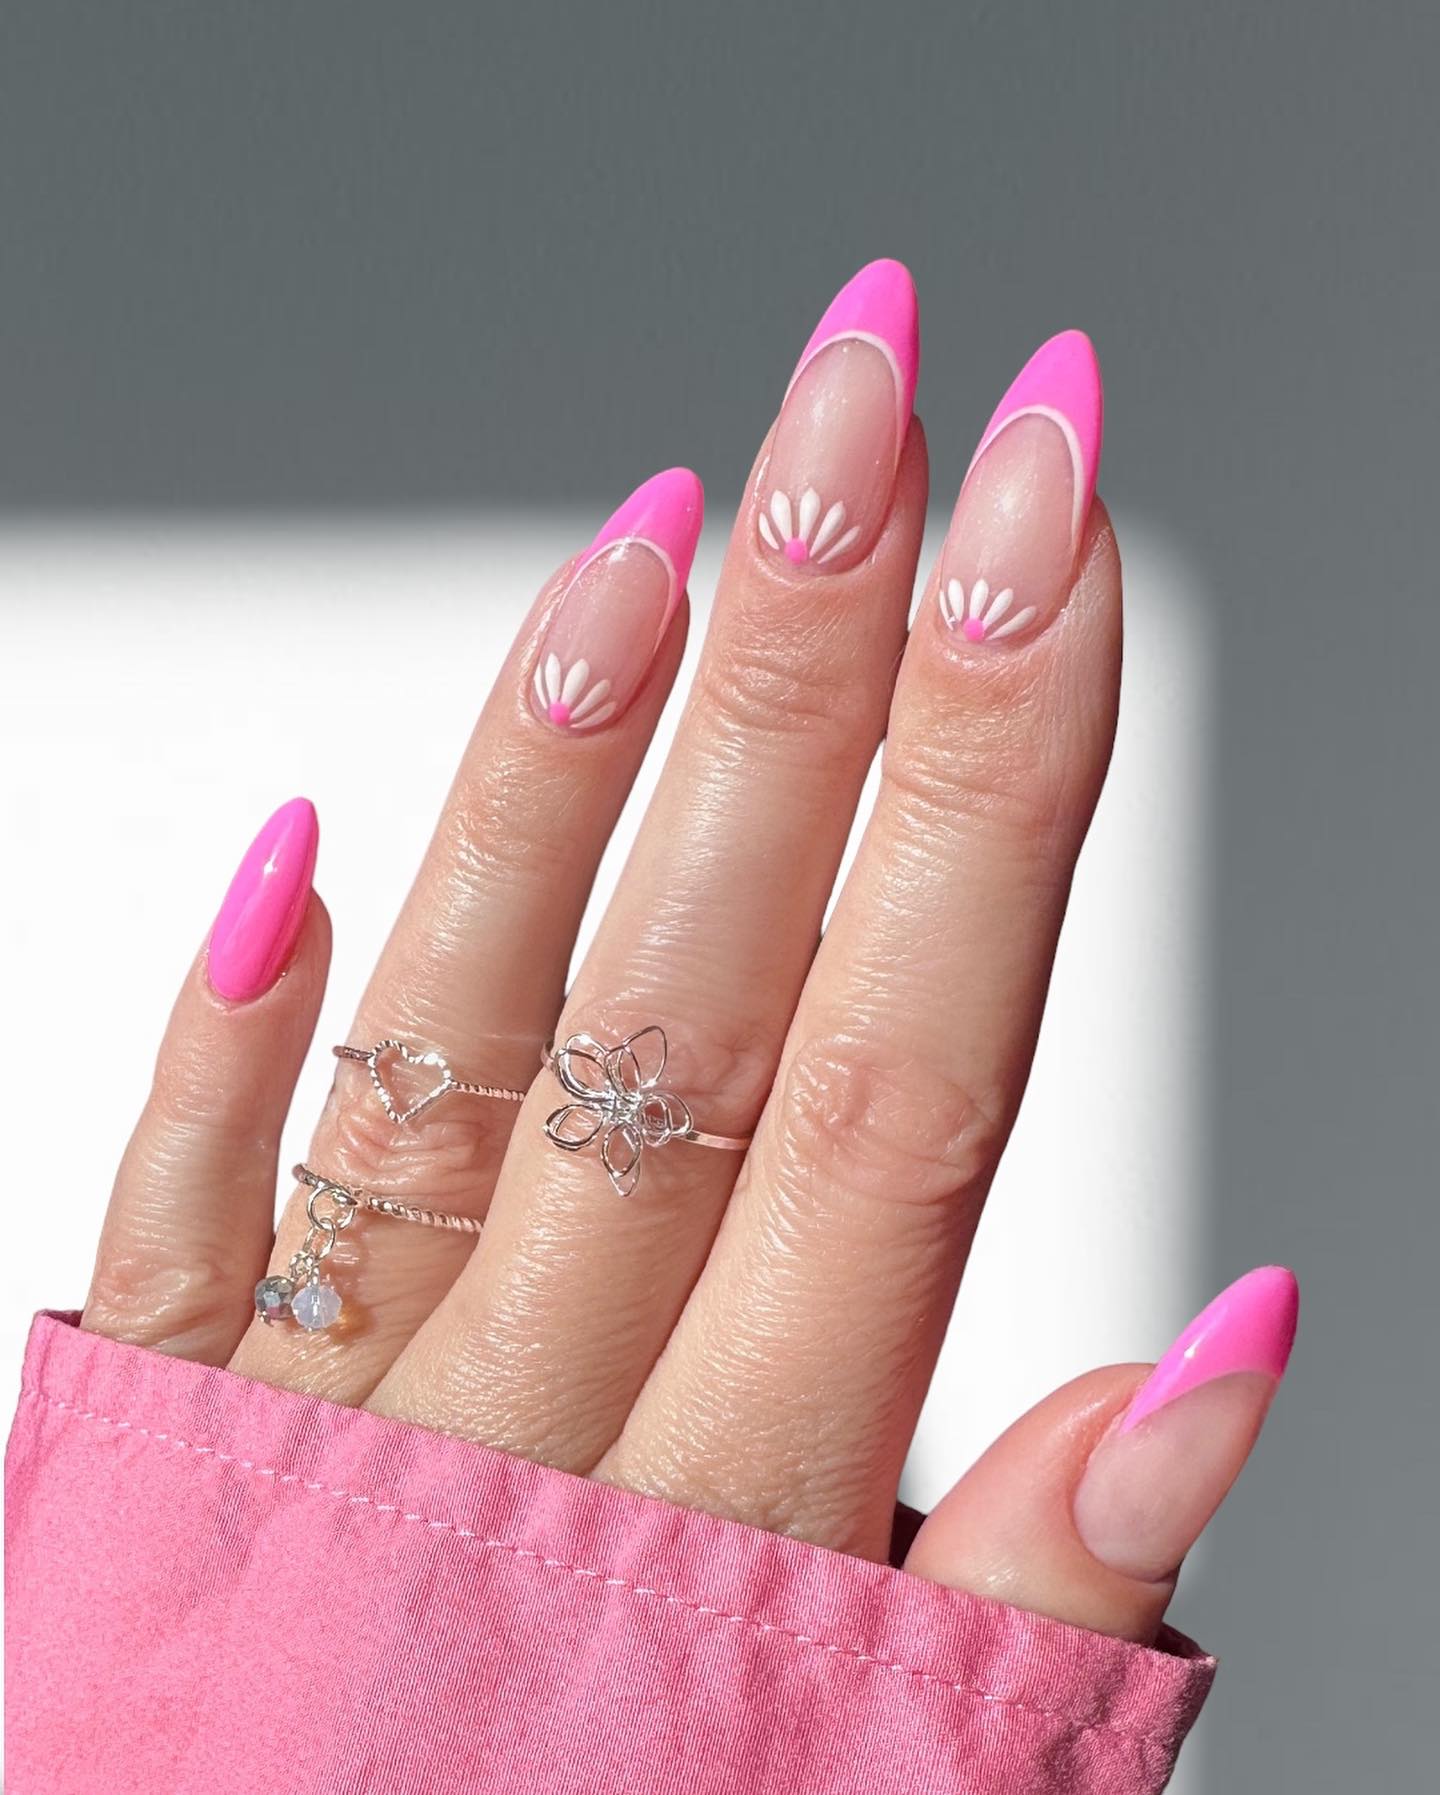 Hot Pink French Tip Nails with Florist Cuticula design